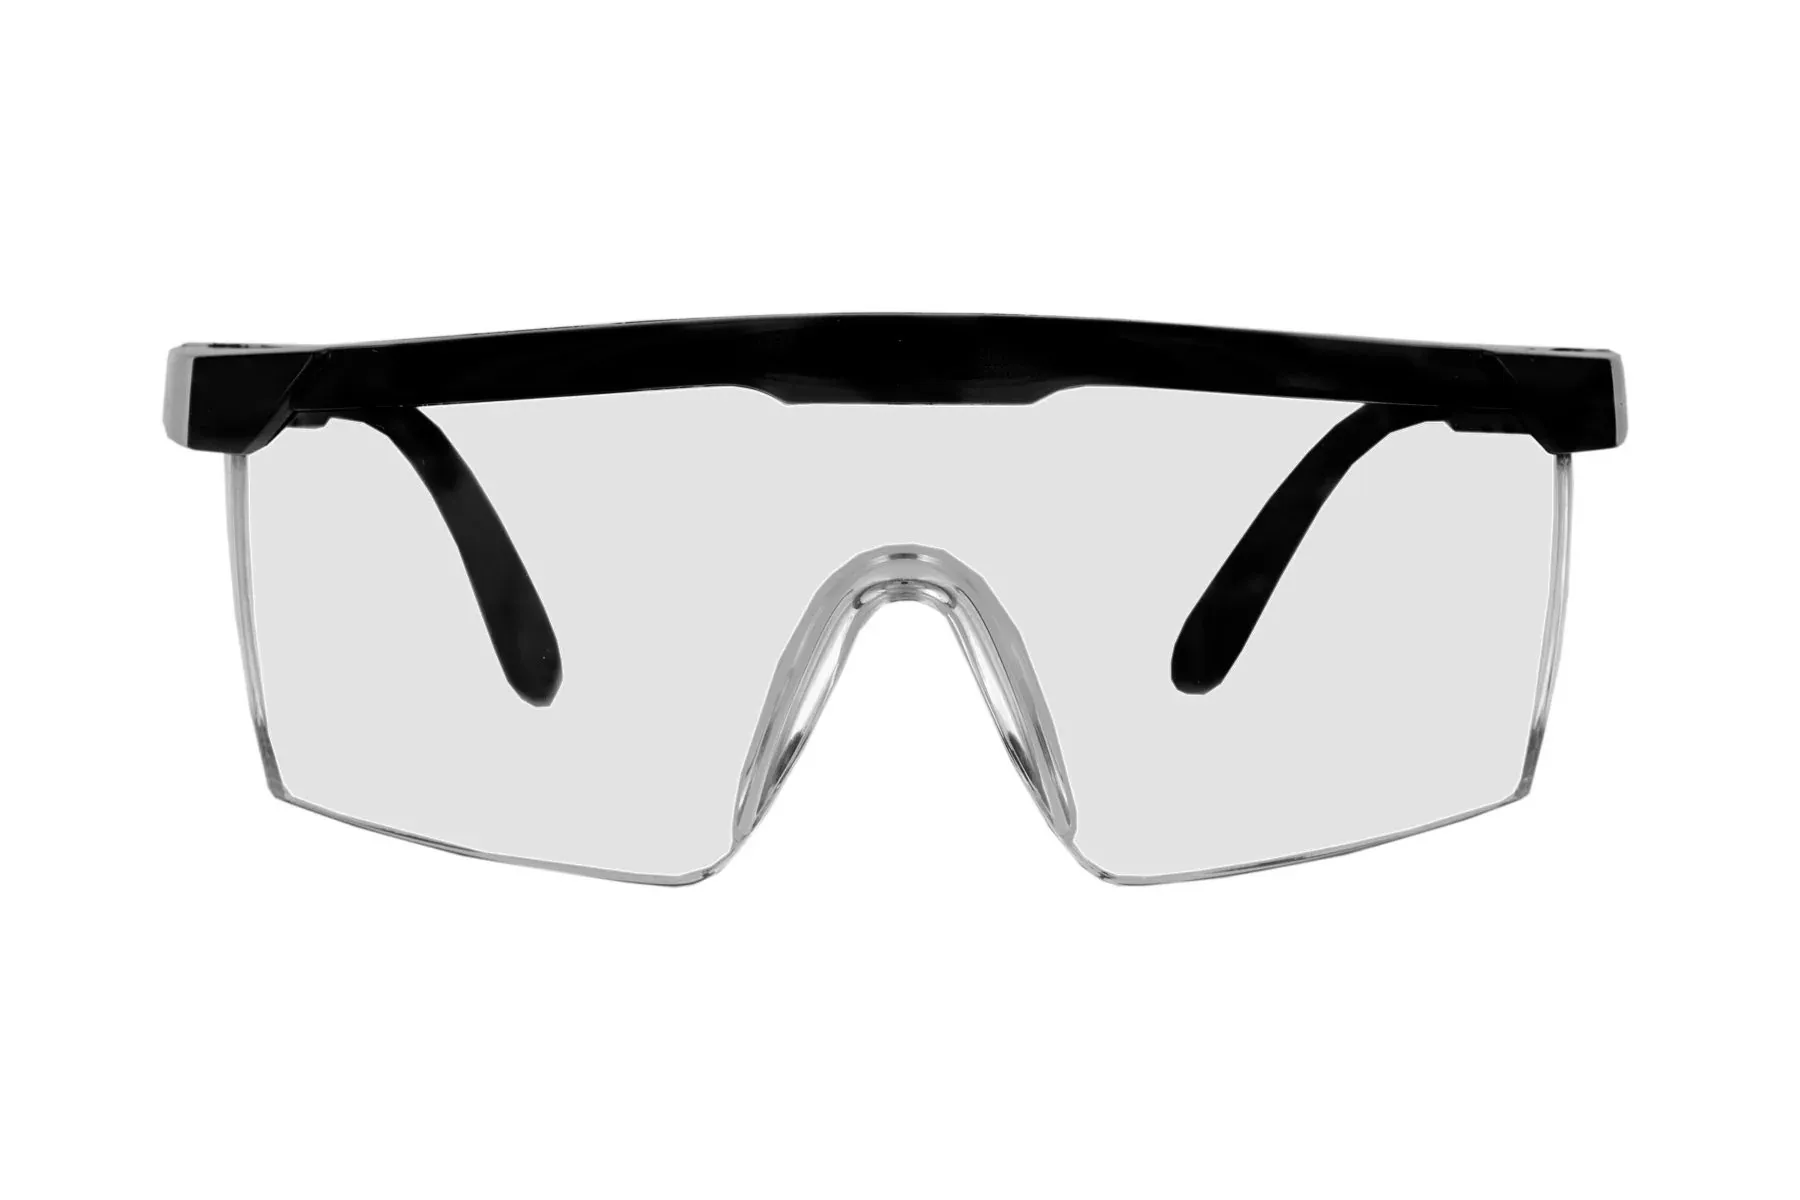 How Are Safety Glasses Different From Regular Glasses?